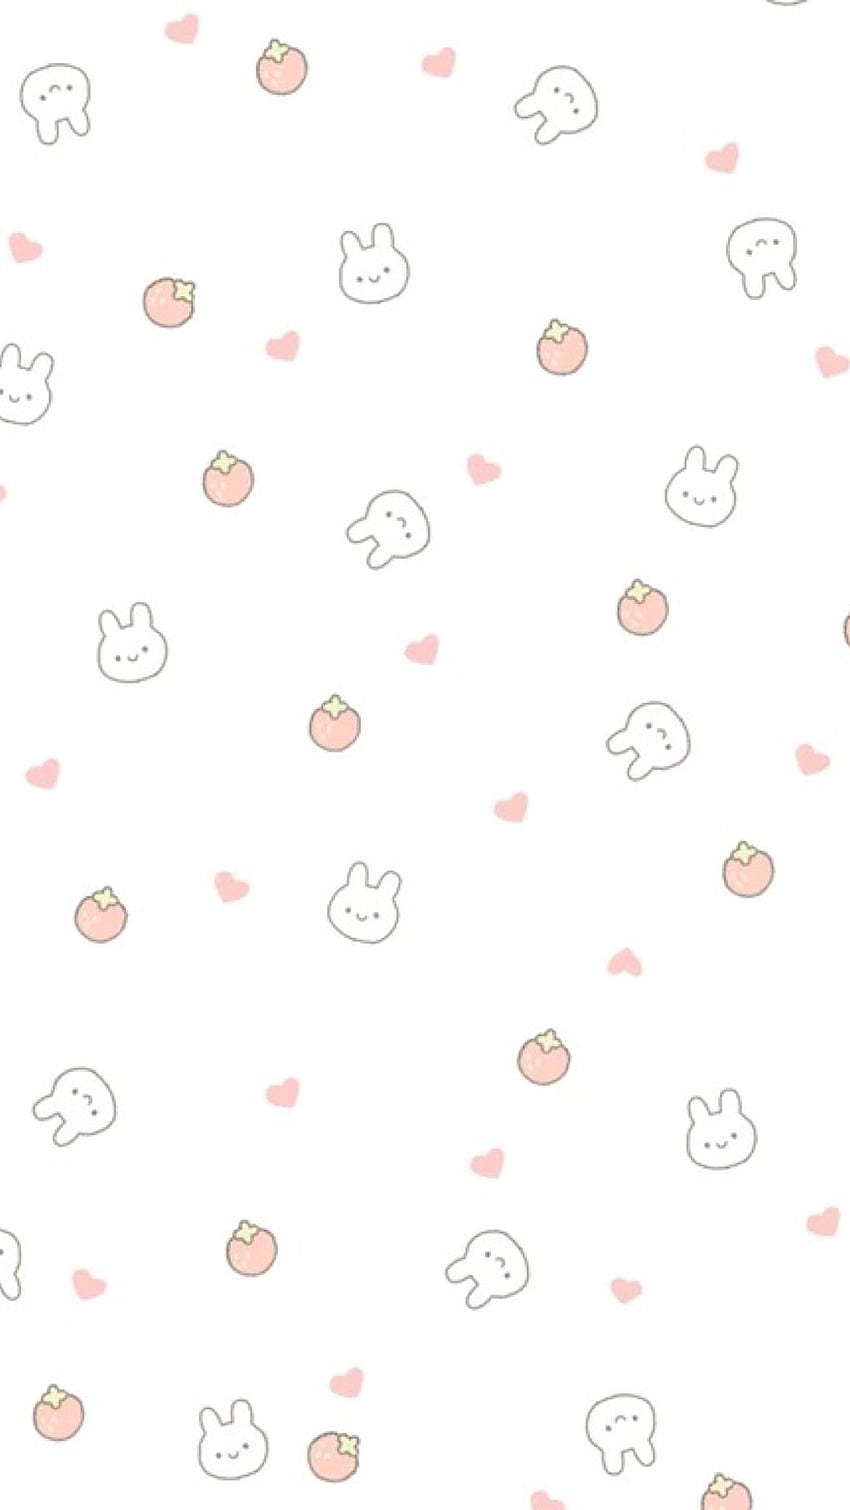 A cute pattern of white and pink hearts - Pattern